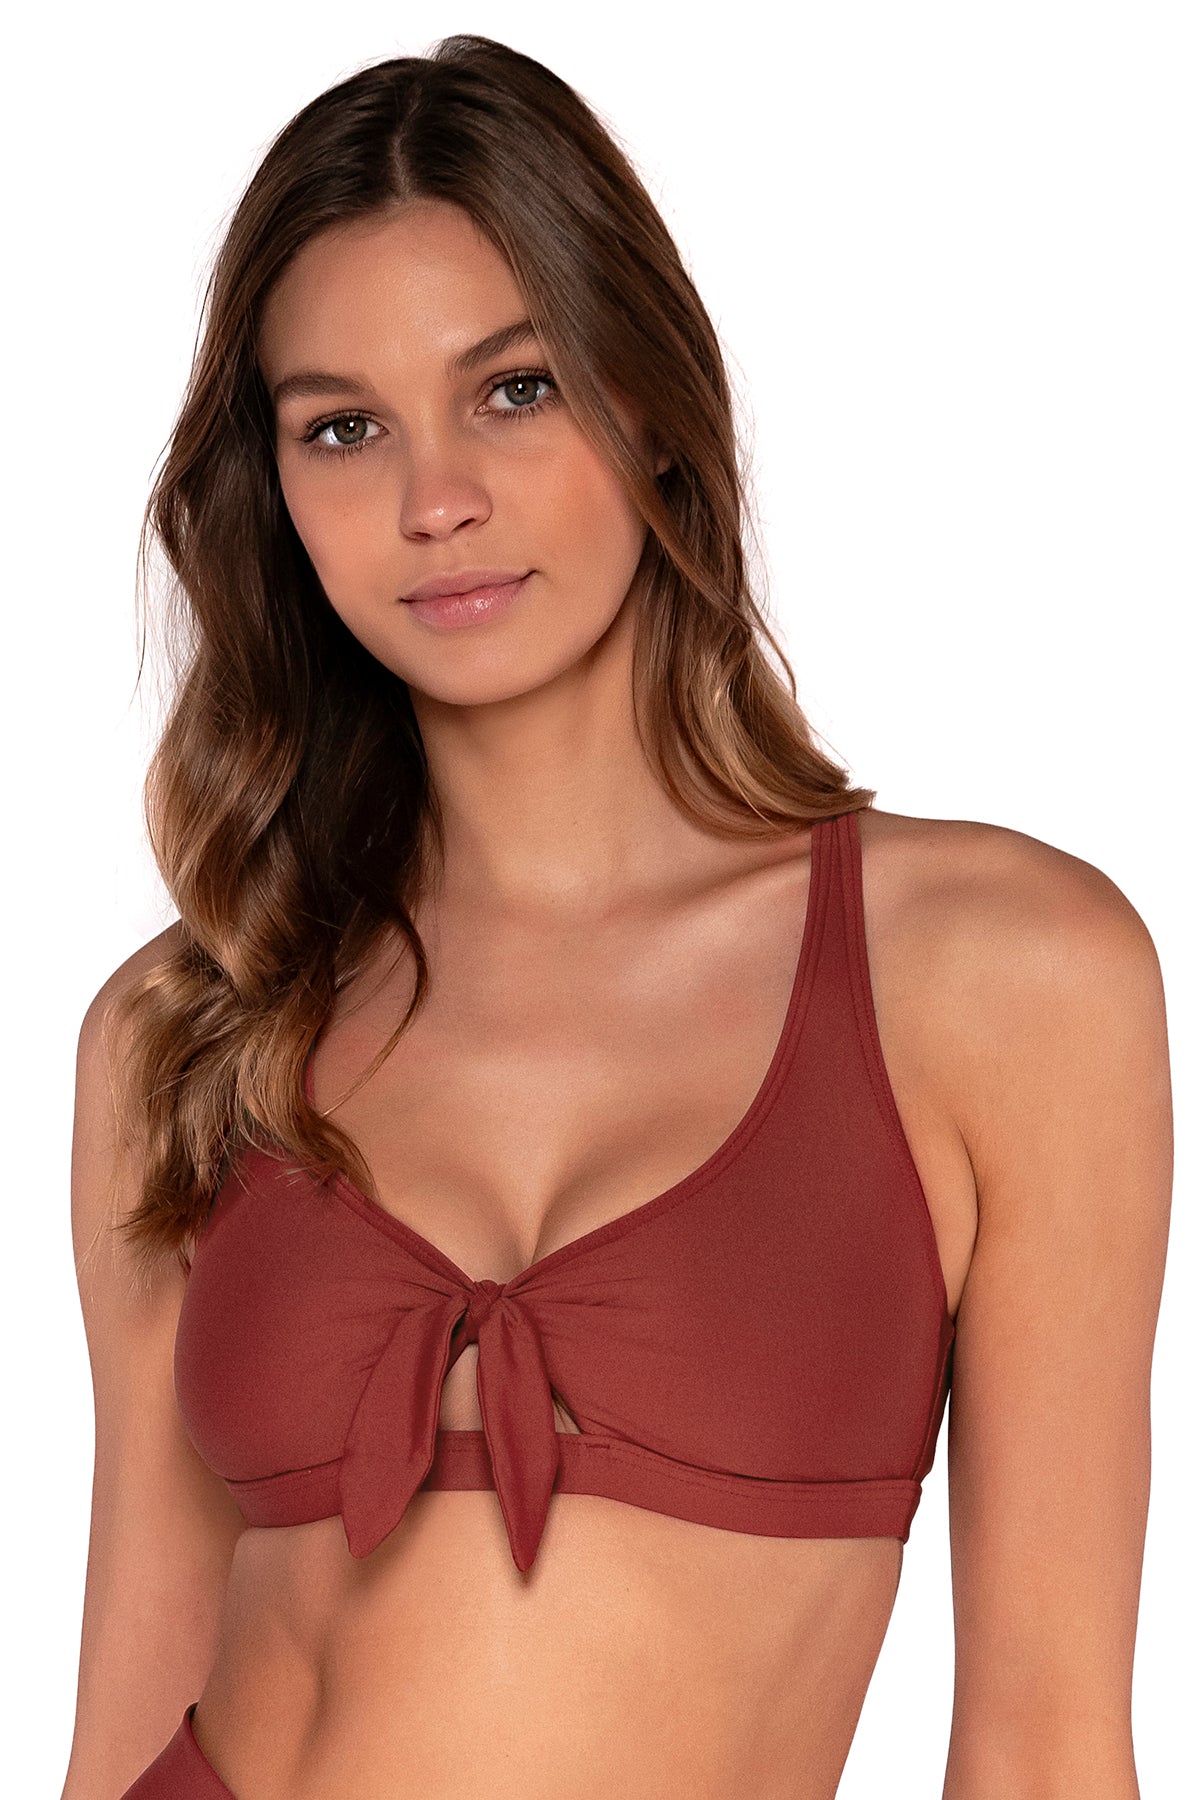 Front view of Sunsets Tuscan Red Brandi Bralette bikini top showing keyhole front tie